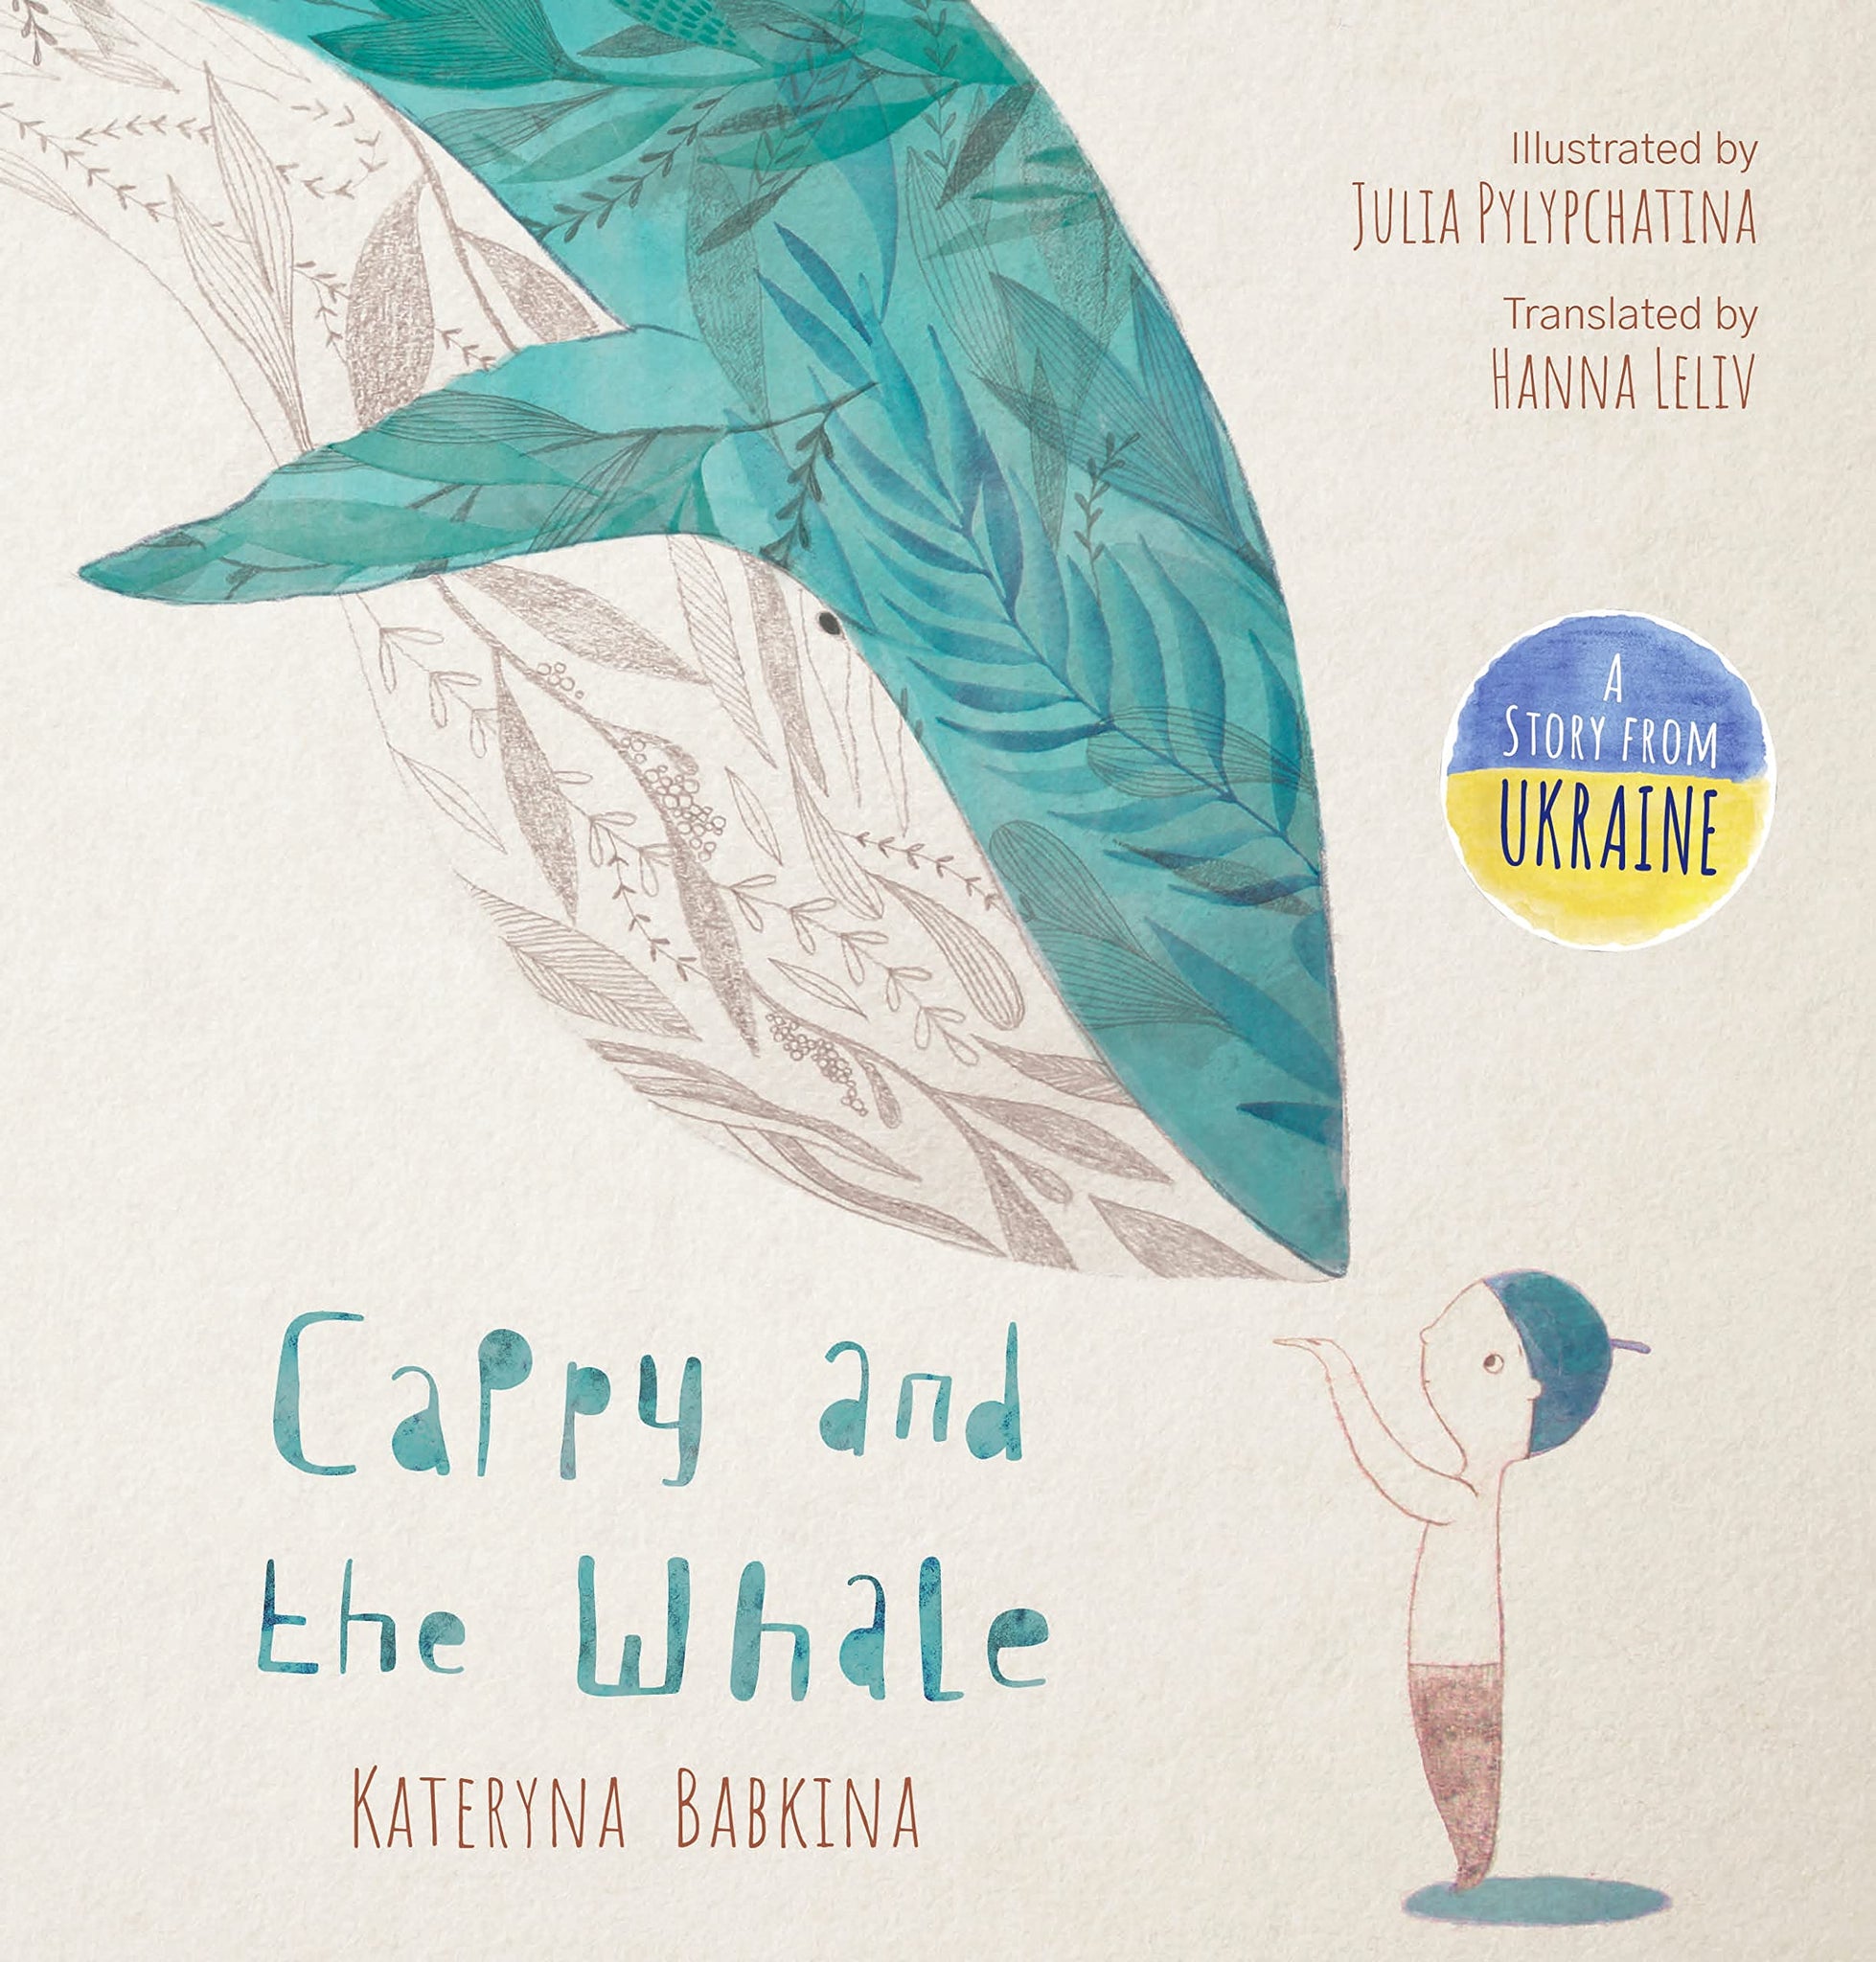 Cappy And The Whale: A Story From Ukraine